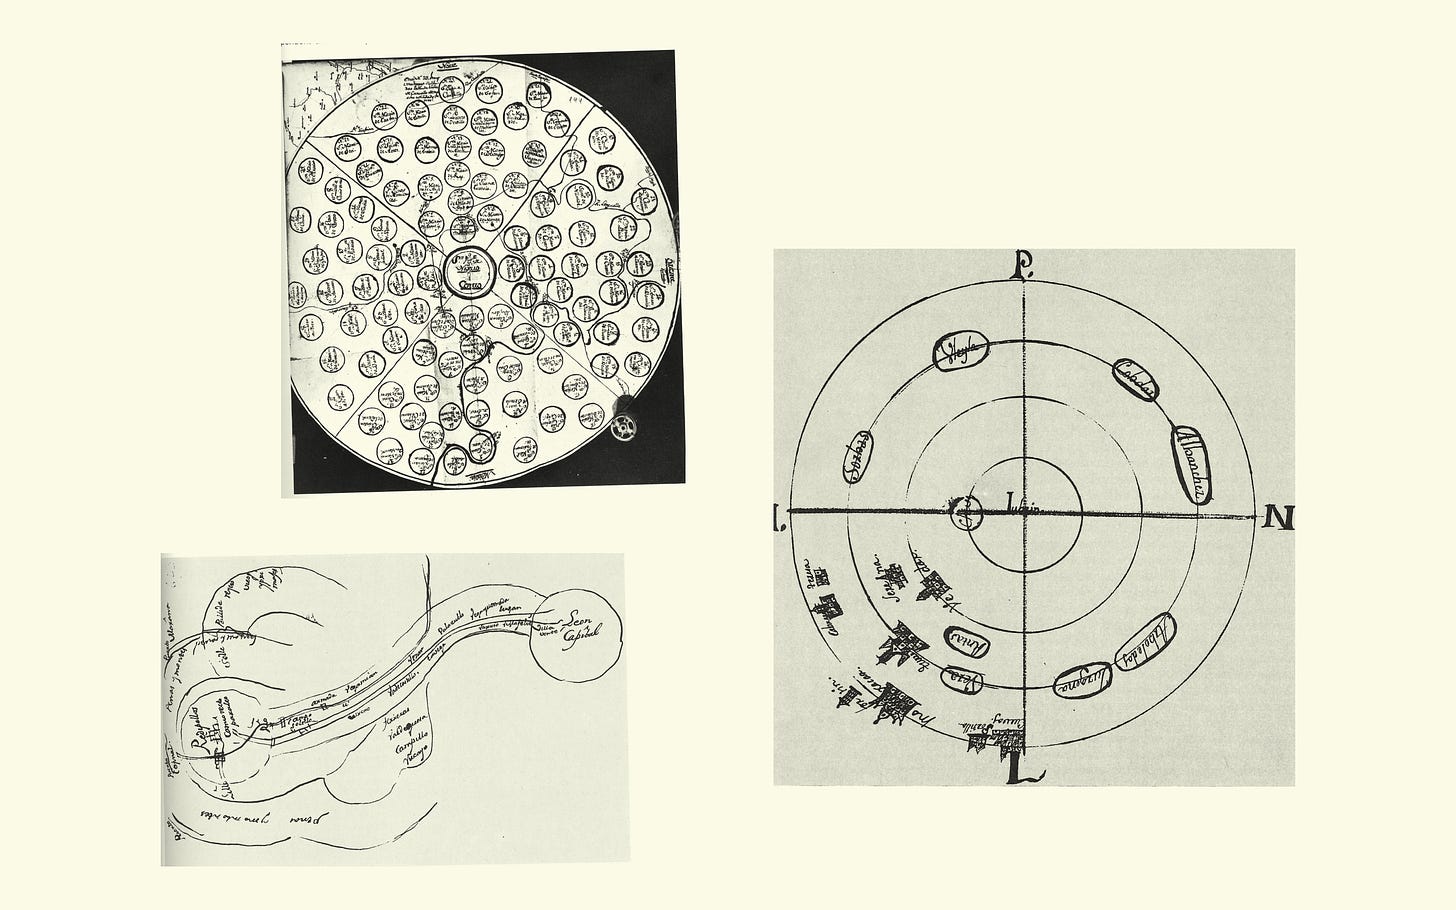 three hand-drawn maps. the first is a circle with a central circle and circles all aronud it. the second looks like a bullsye target with villages written onto the various concentric circles. the third consists of a bunch of arcs that look quite phallic shaped